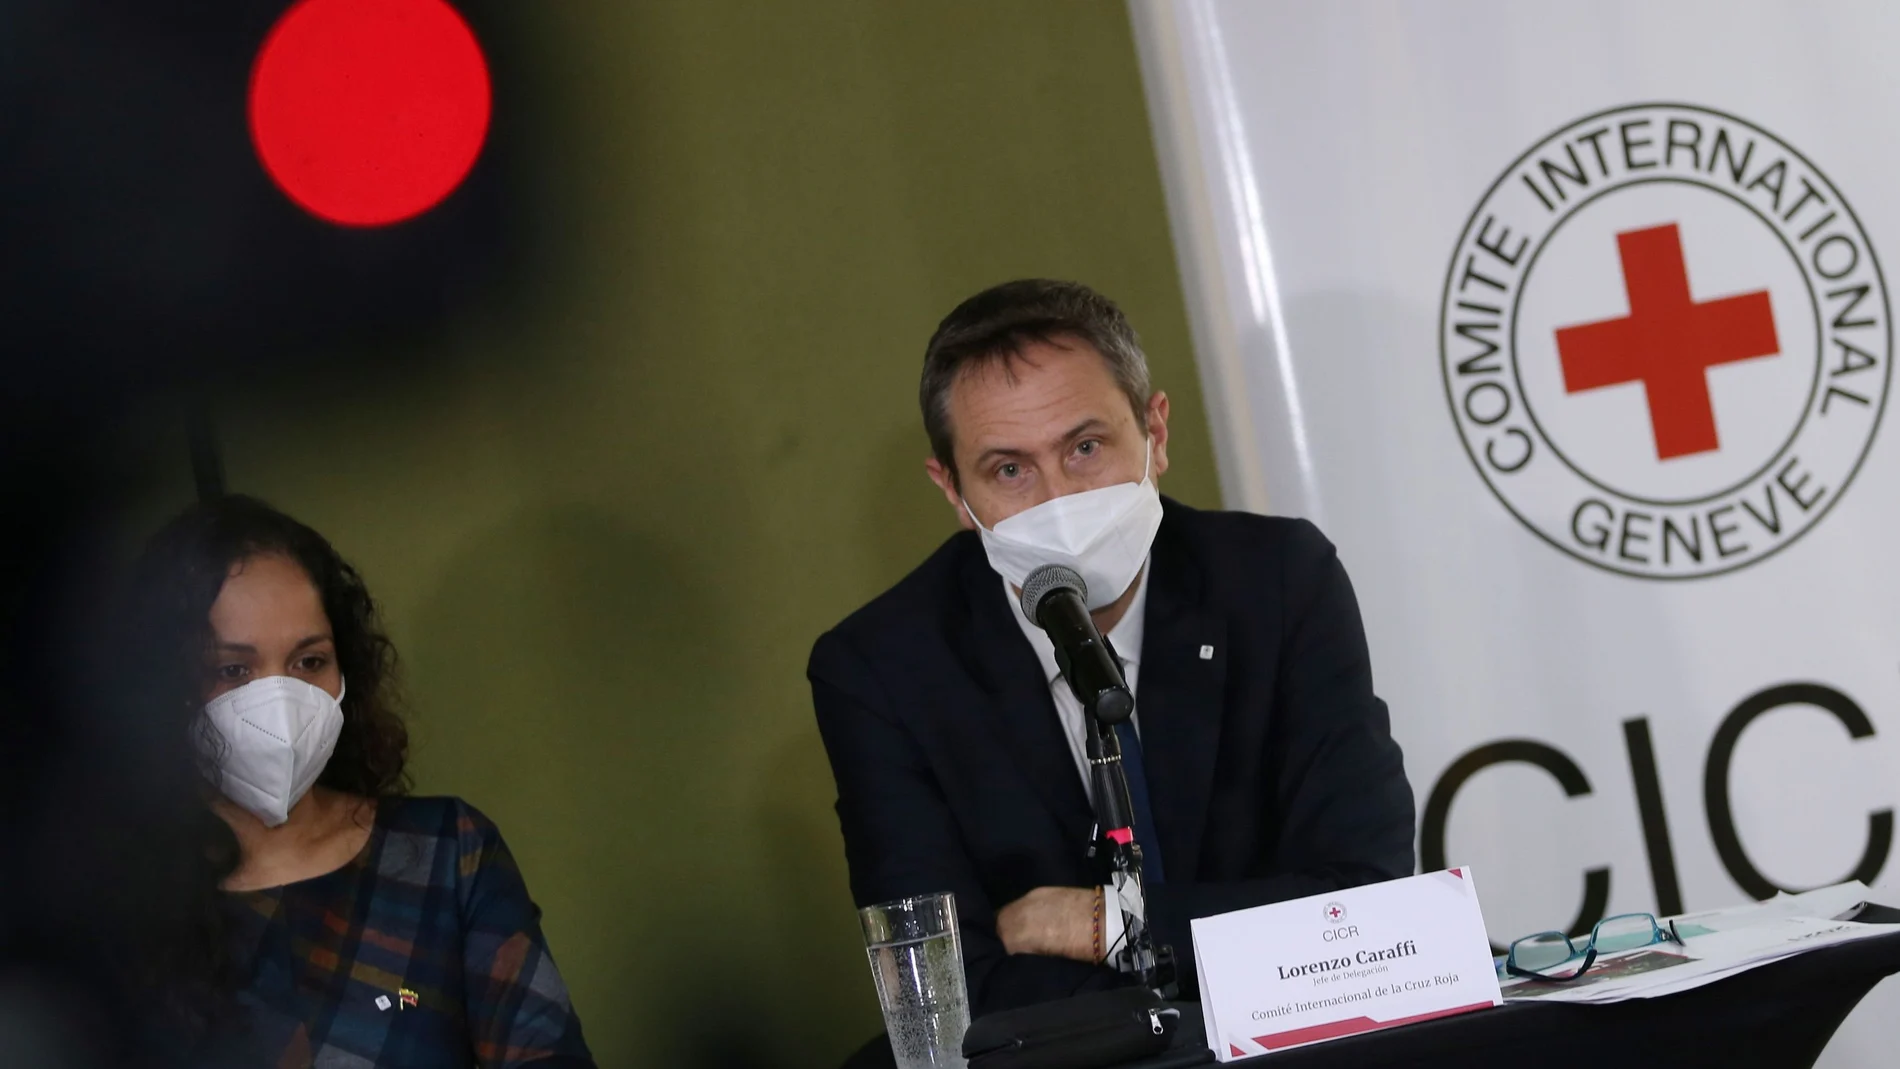 Lorenzo Caraffi, head of International Committee of the Red Cross (ICRC) delegation in Colombia, speaks during a news conference in Bogota, Colombia March 24, 2021. REUTERS/Luisa Gonzalez